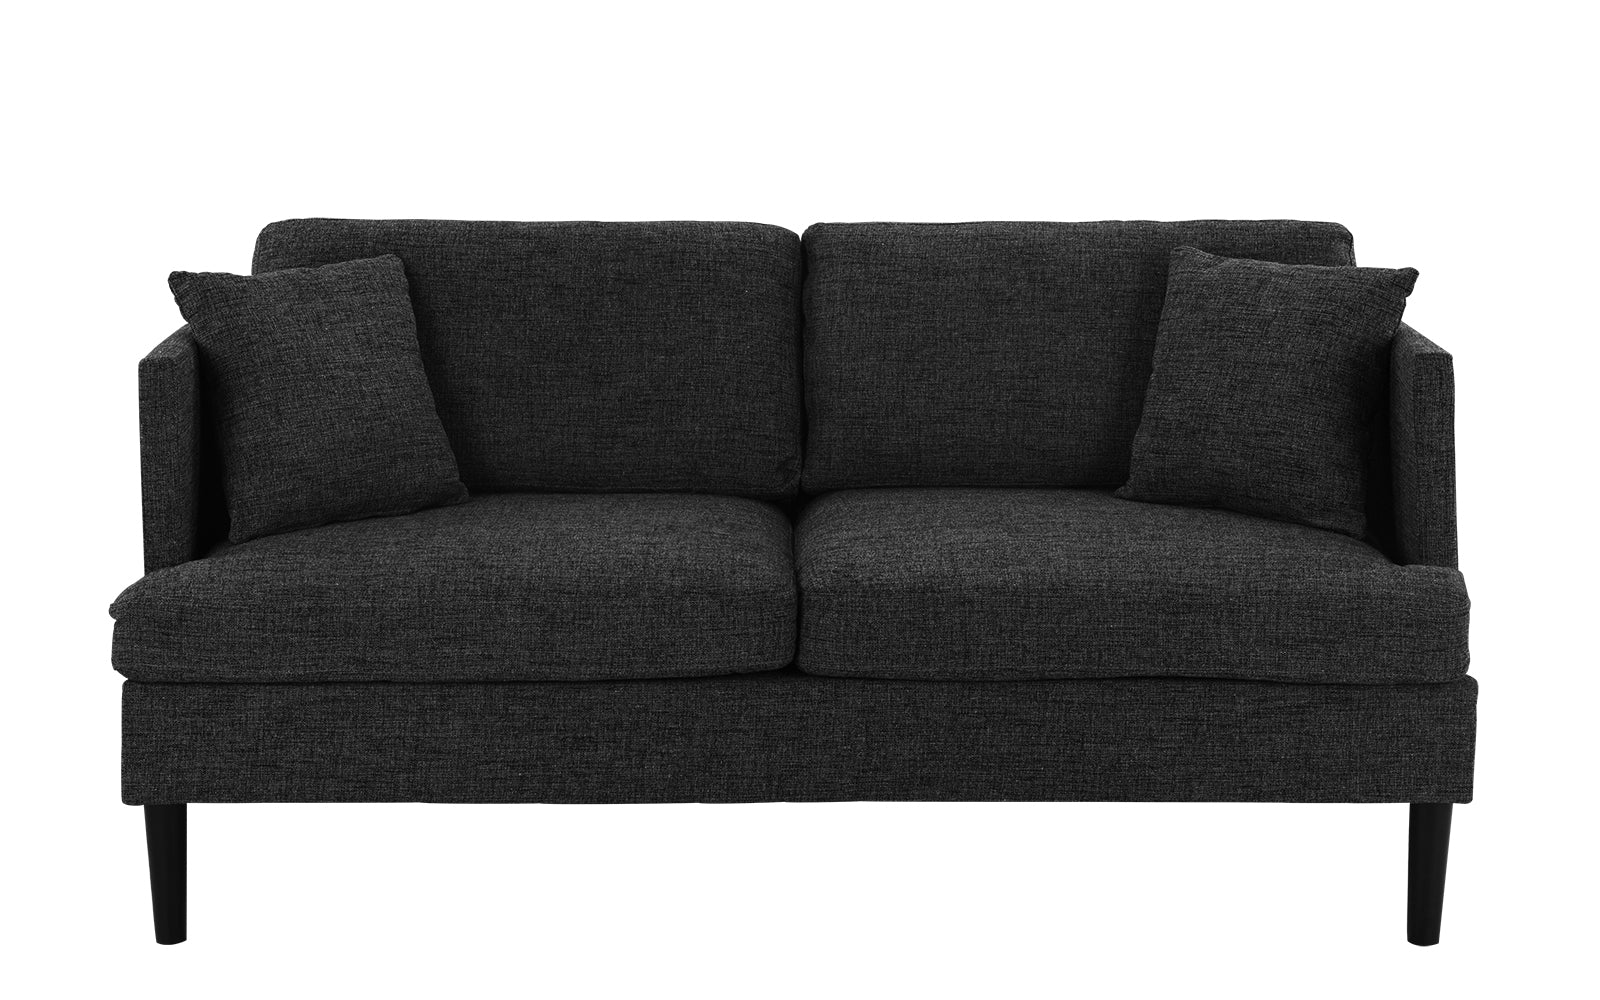 August Modern Loveseat Sofa with Wooden Legs